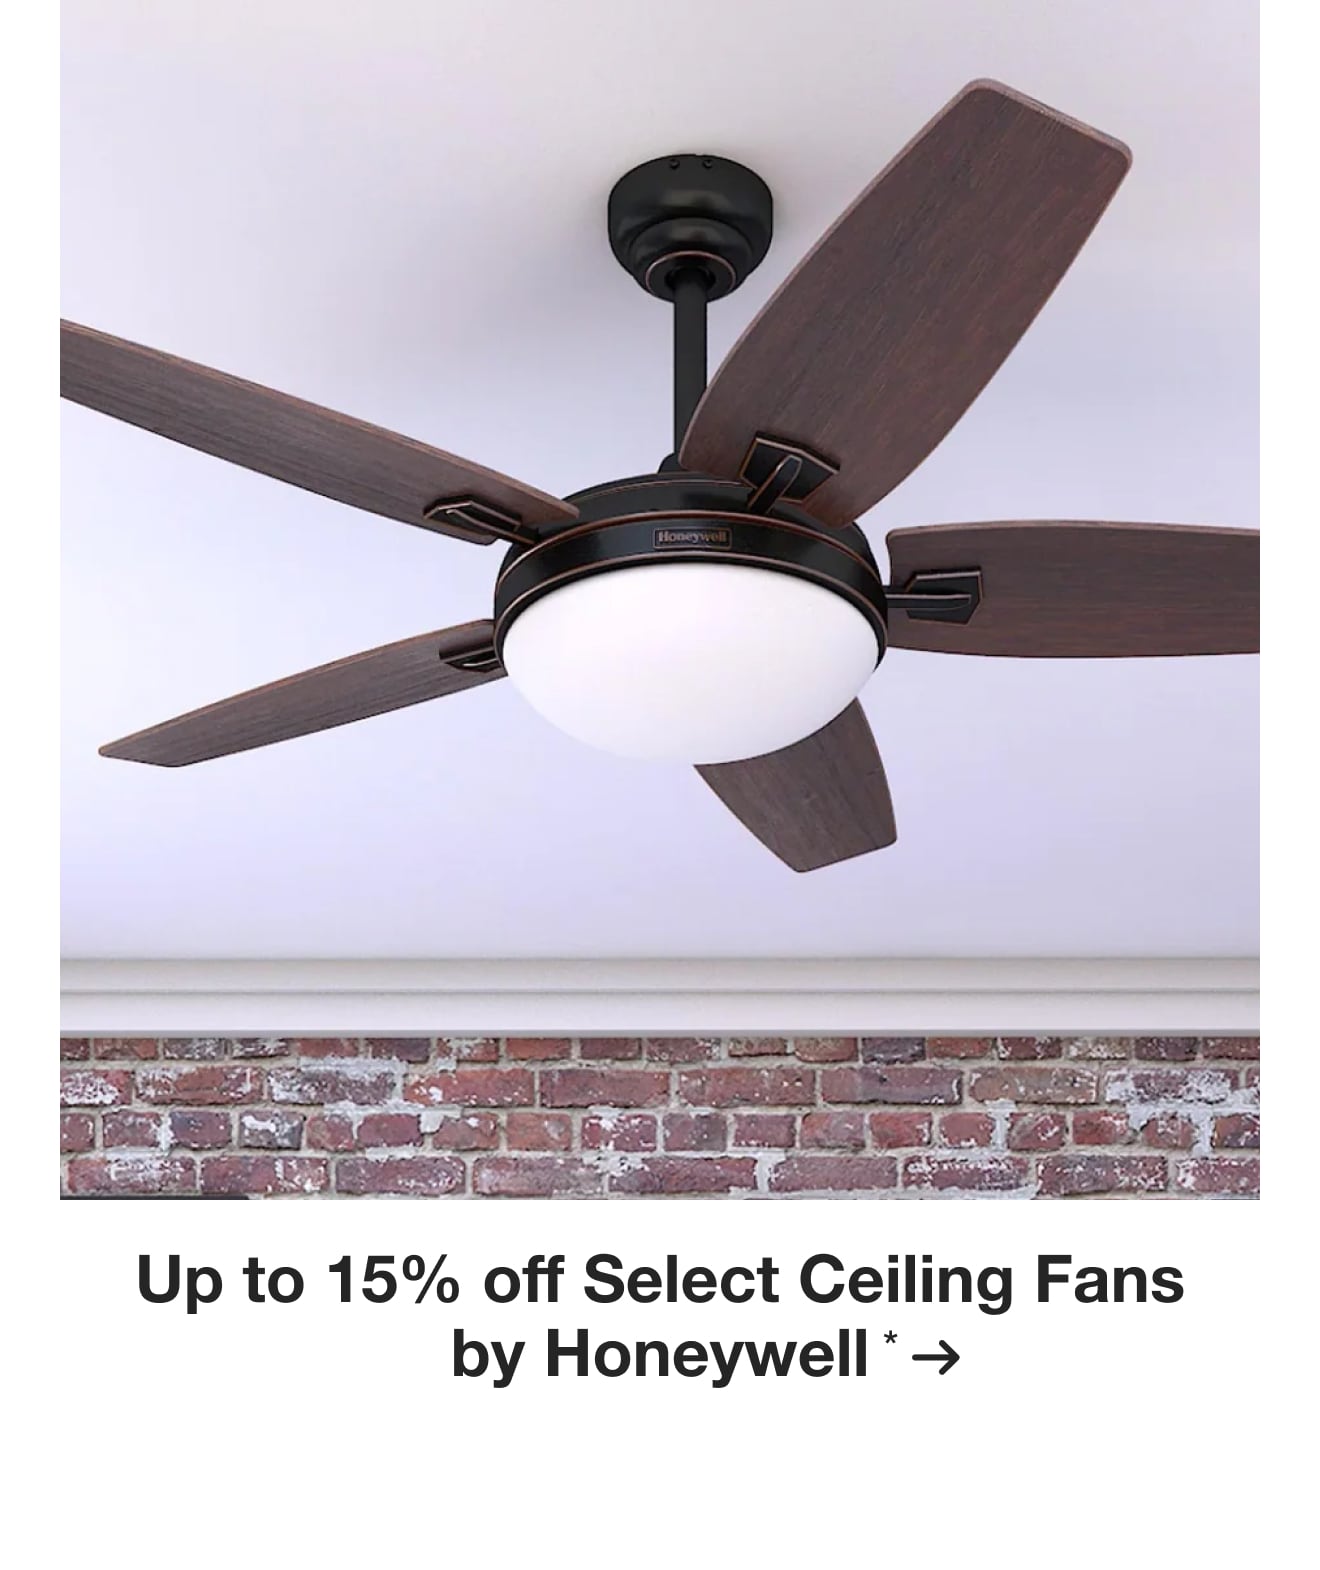 Up to 15% off Select Ceiling Fans by Honeywell*